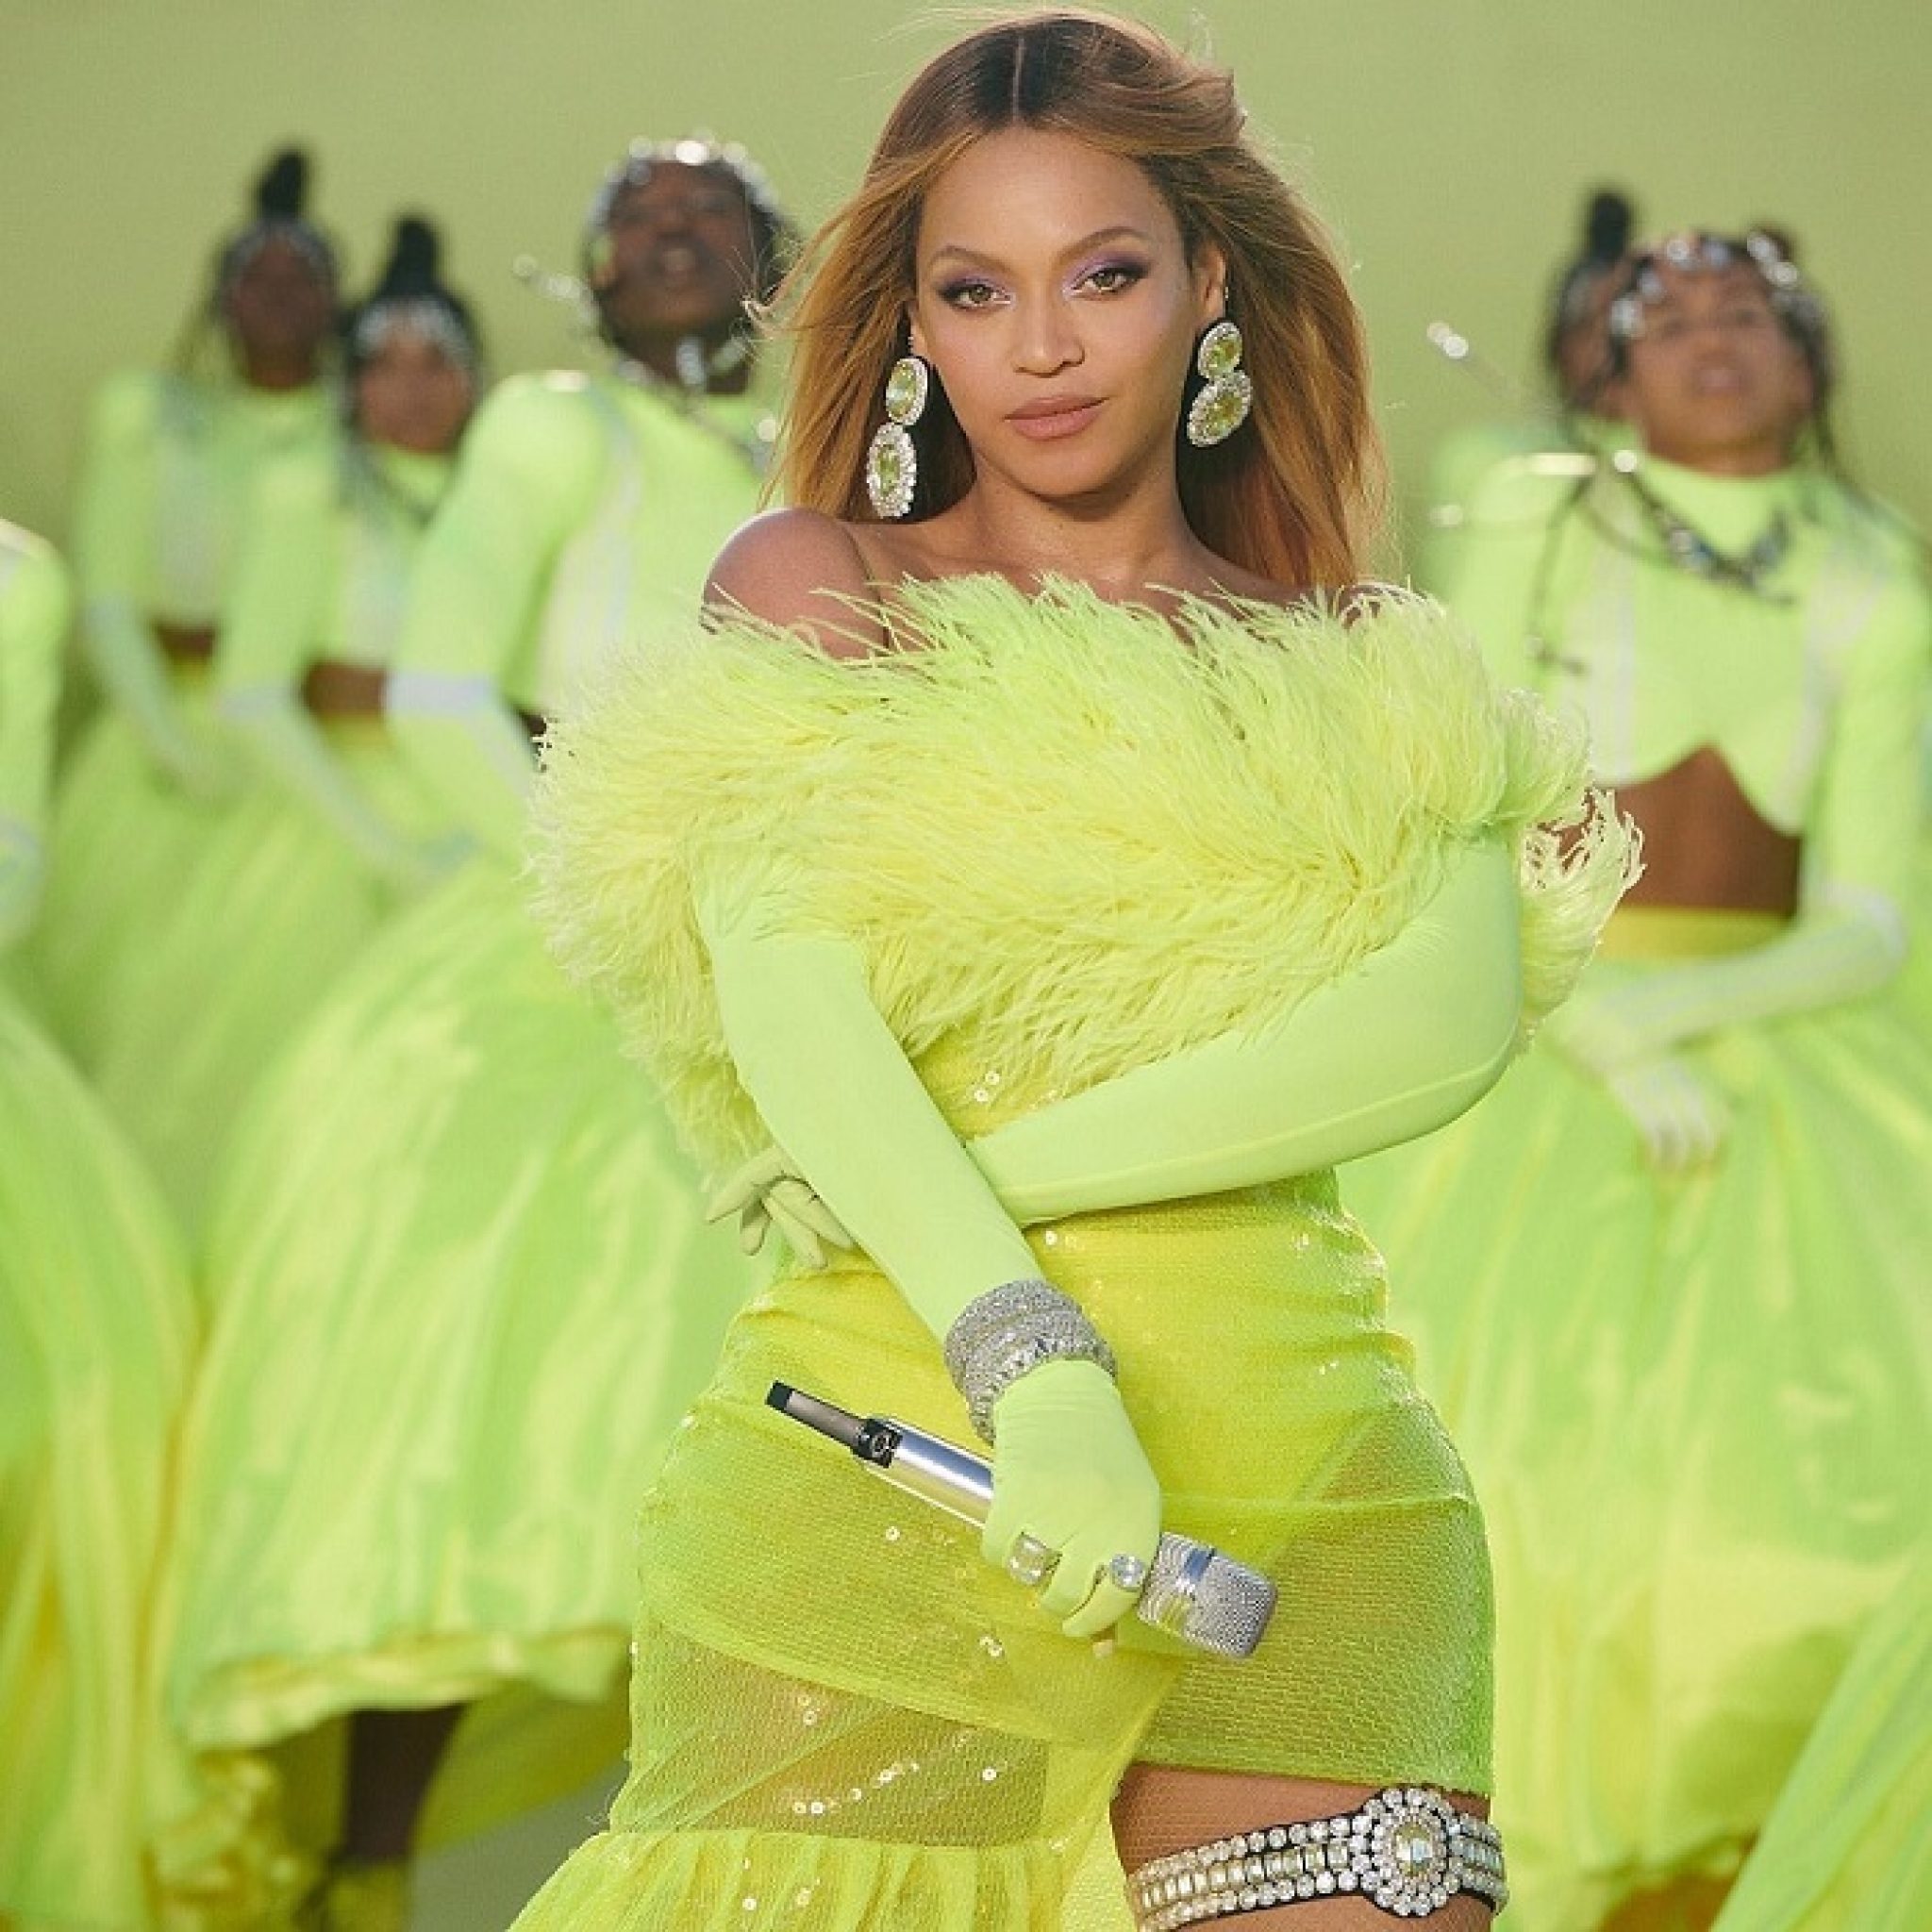 Beyonce Delivered A Beautiful Performance At The 2022 Oscars | FPN